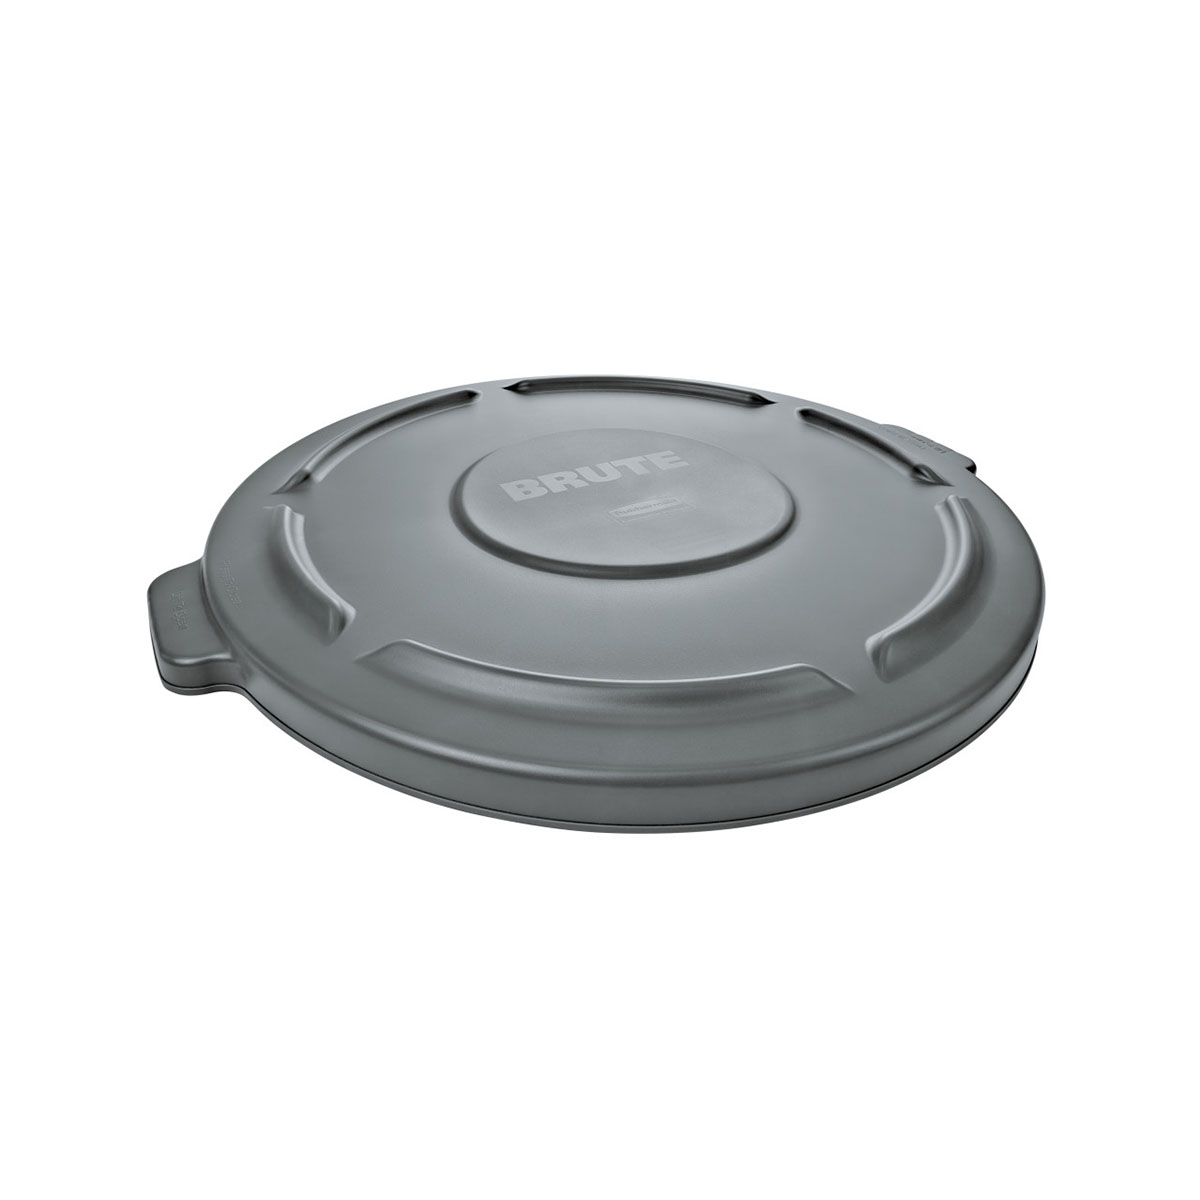 Rubbermaid FG264560 Lid (Only) for 44-Gallon Round Brute Container # 2643